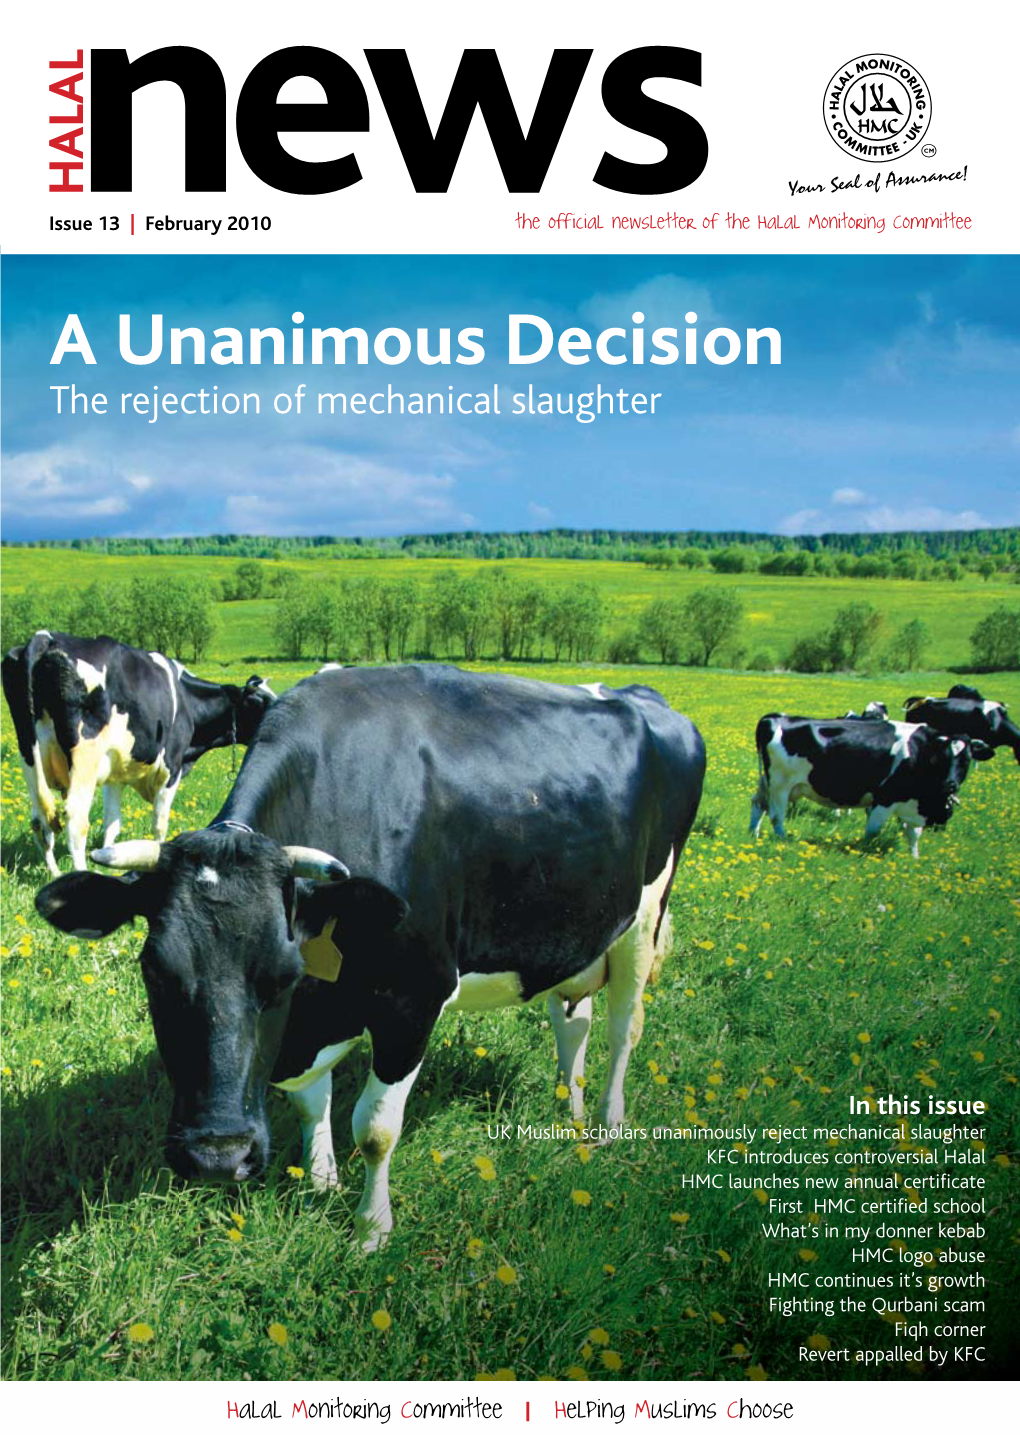 A Unanimous Decision the Rejection of Mechanical Slaughter